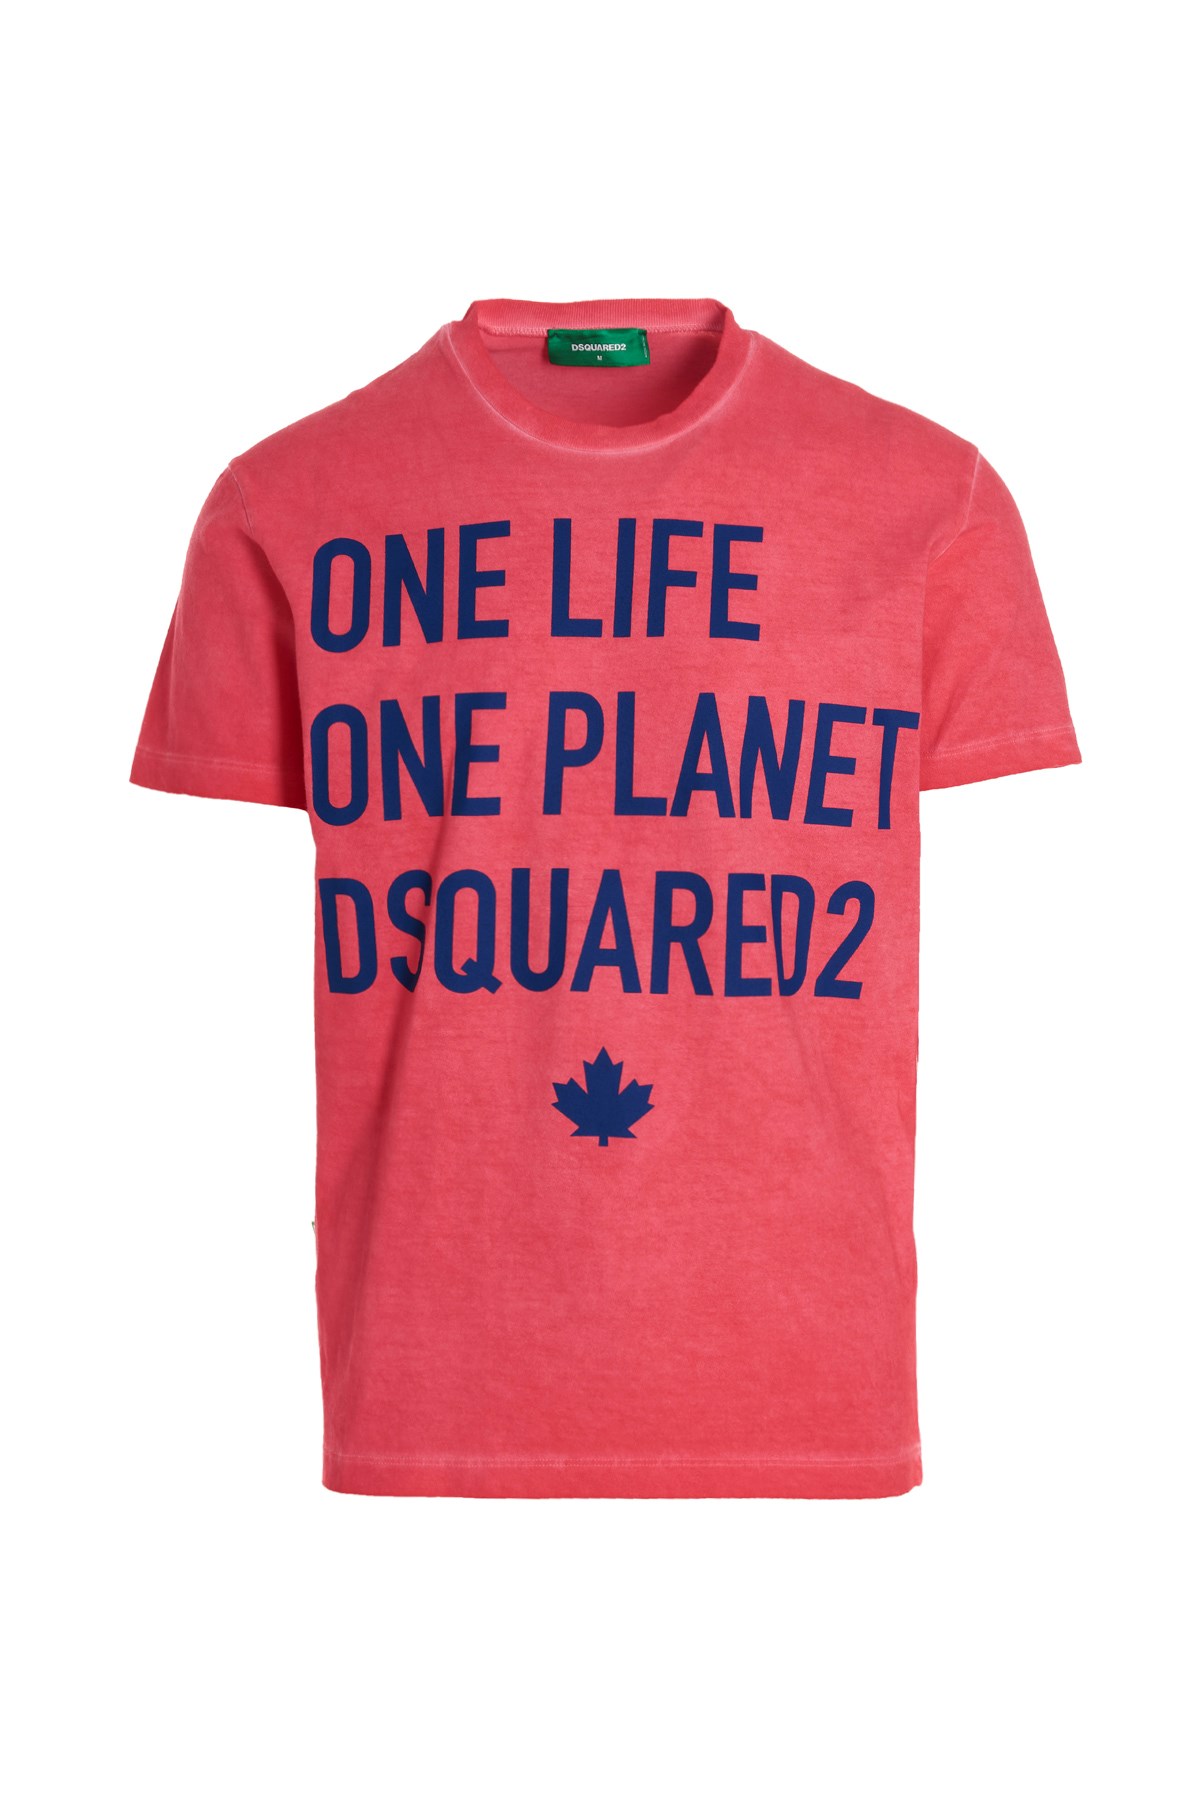 DSQUARED2 T-Shirt 'One Life One Planet'